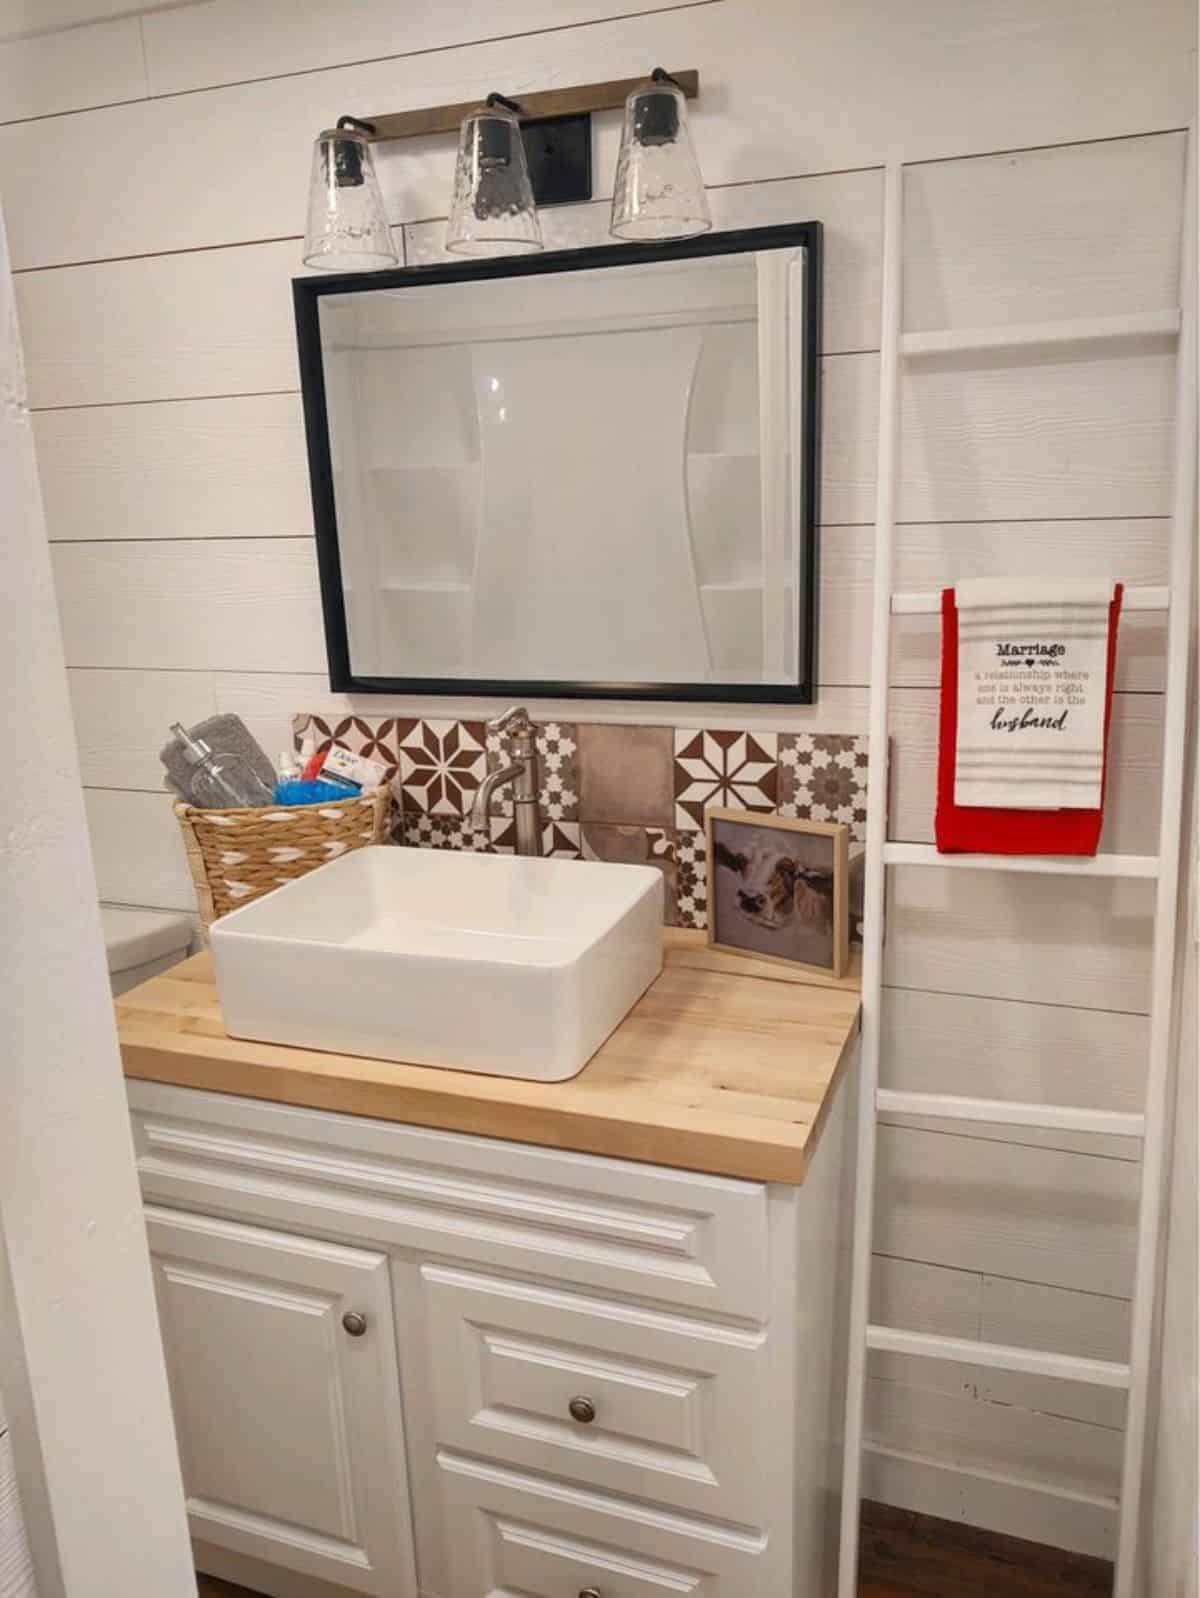 bathroom of 40' spacious tiny house has all the standard fittings